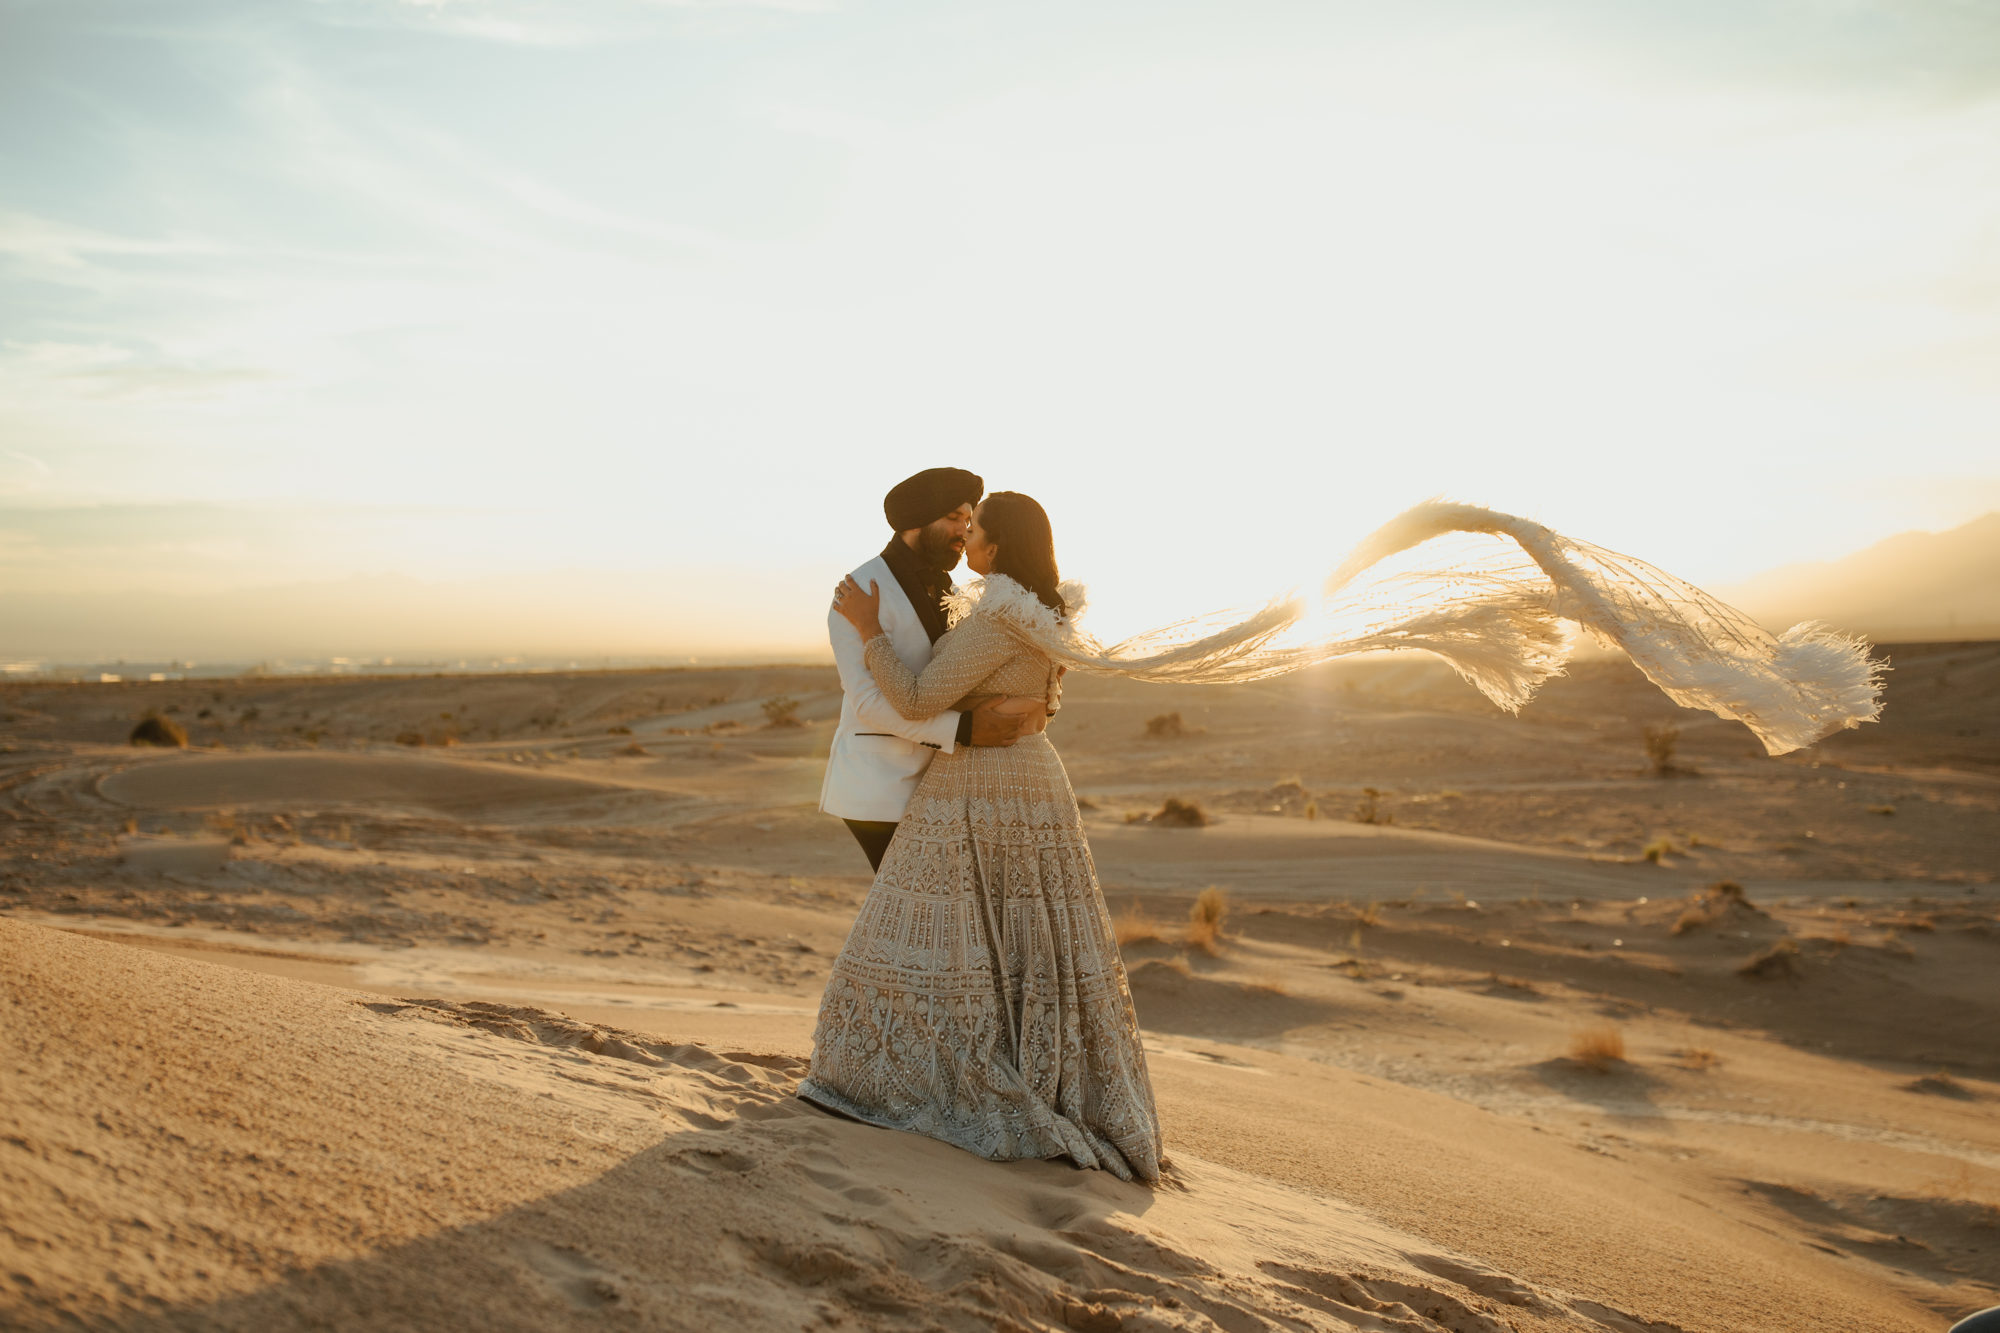 bride and groom standing in the sand dunes of the nevada desert during golden hour as her cape blows in the wind and the groom leans in for a kiss